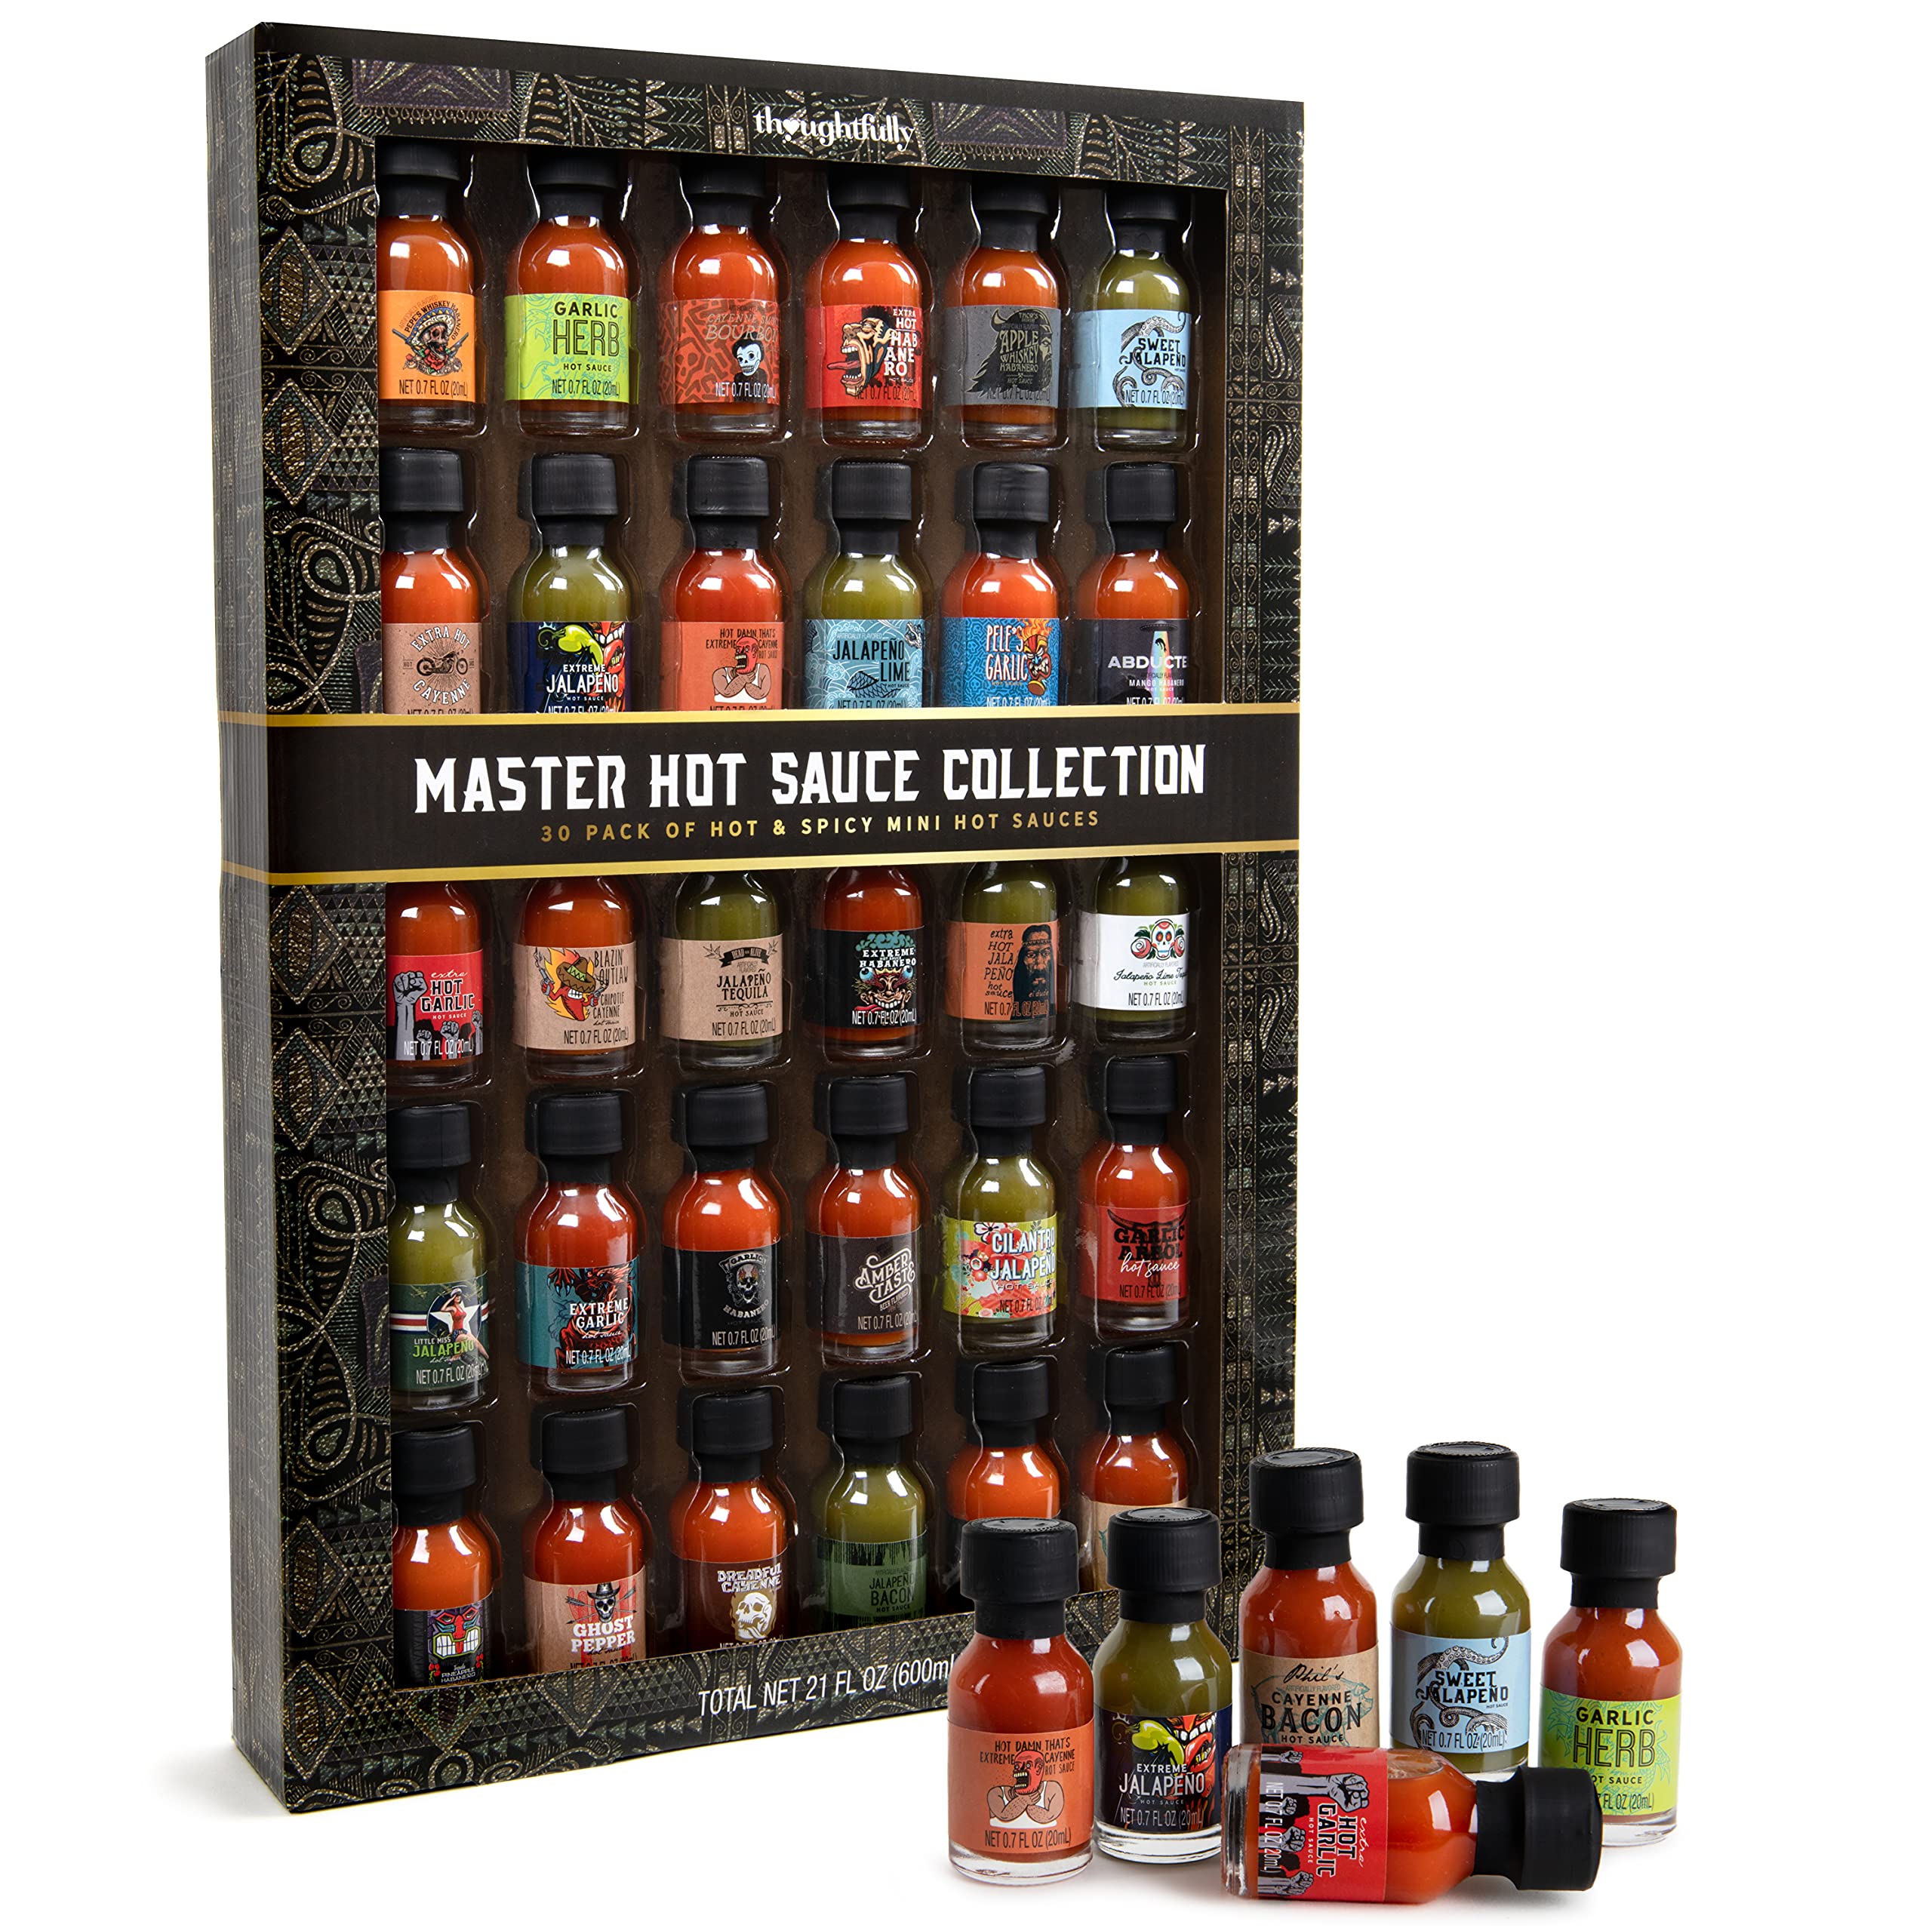 Thoughtfully Gourmet Master Hot Sauce Collection Sampler Set Vegan and  Vegetarian Flavors Include Garlic Herb Apple Whiskey and More Set of 30